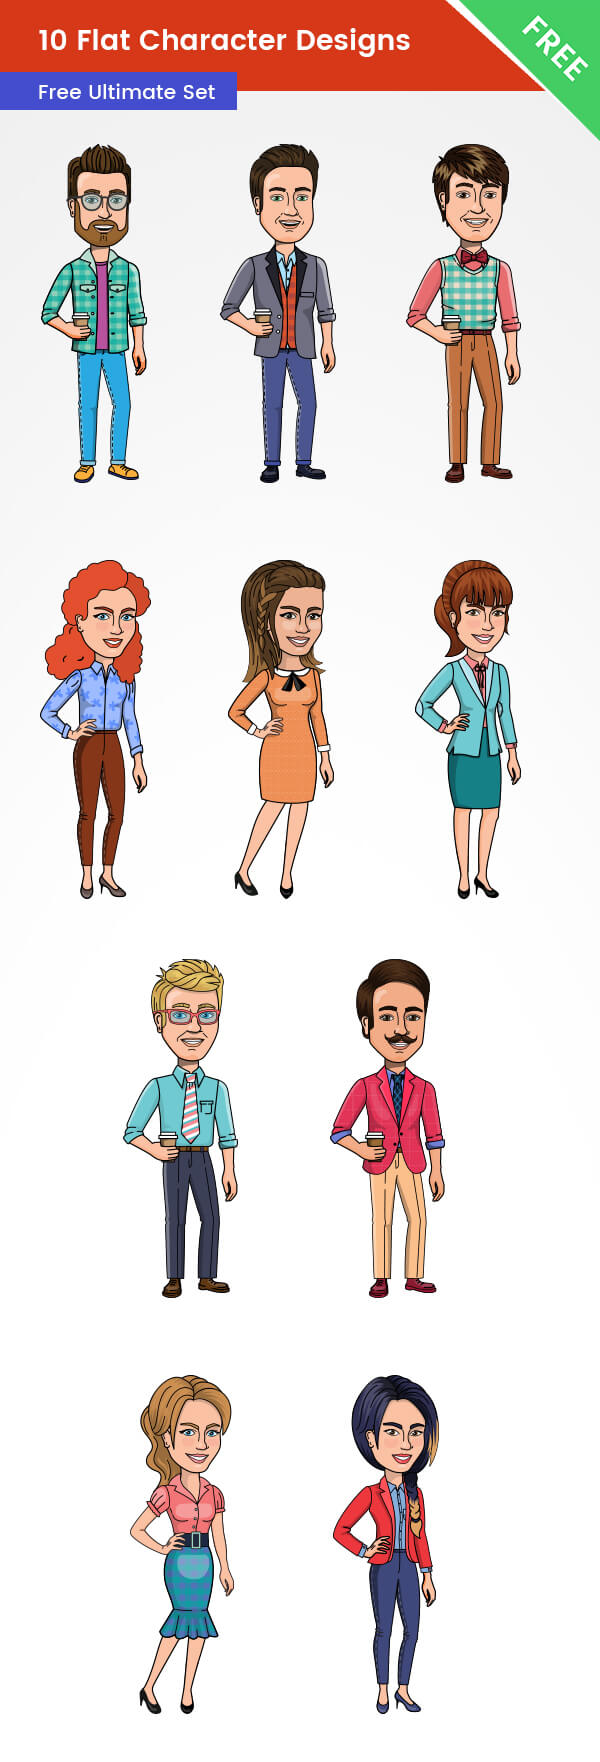 10 free flat character designs Free PSD